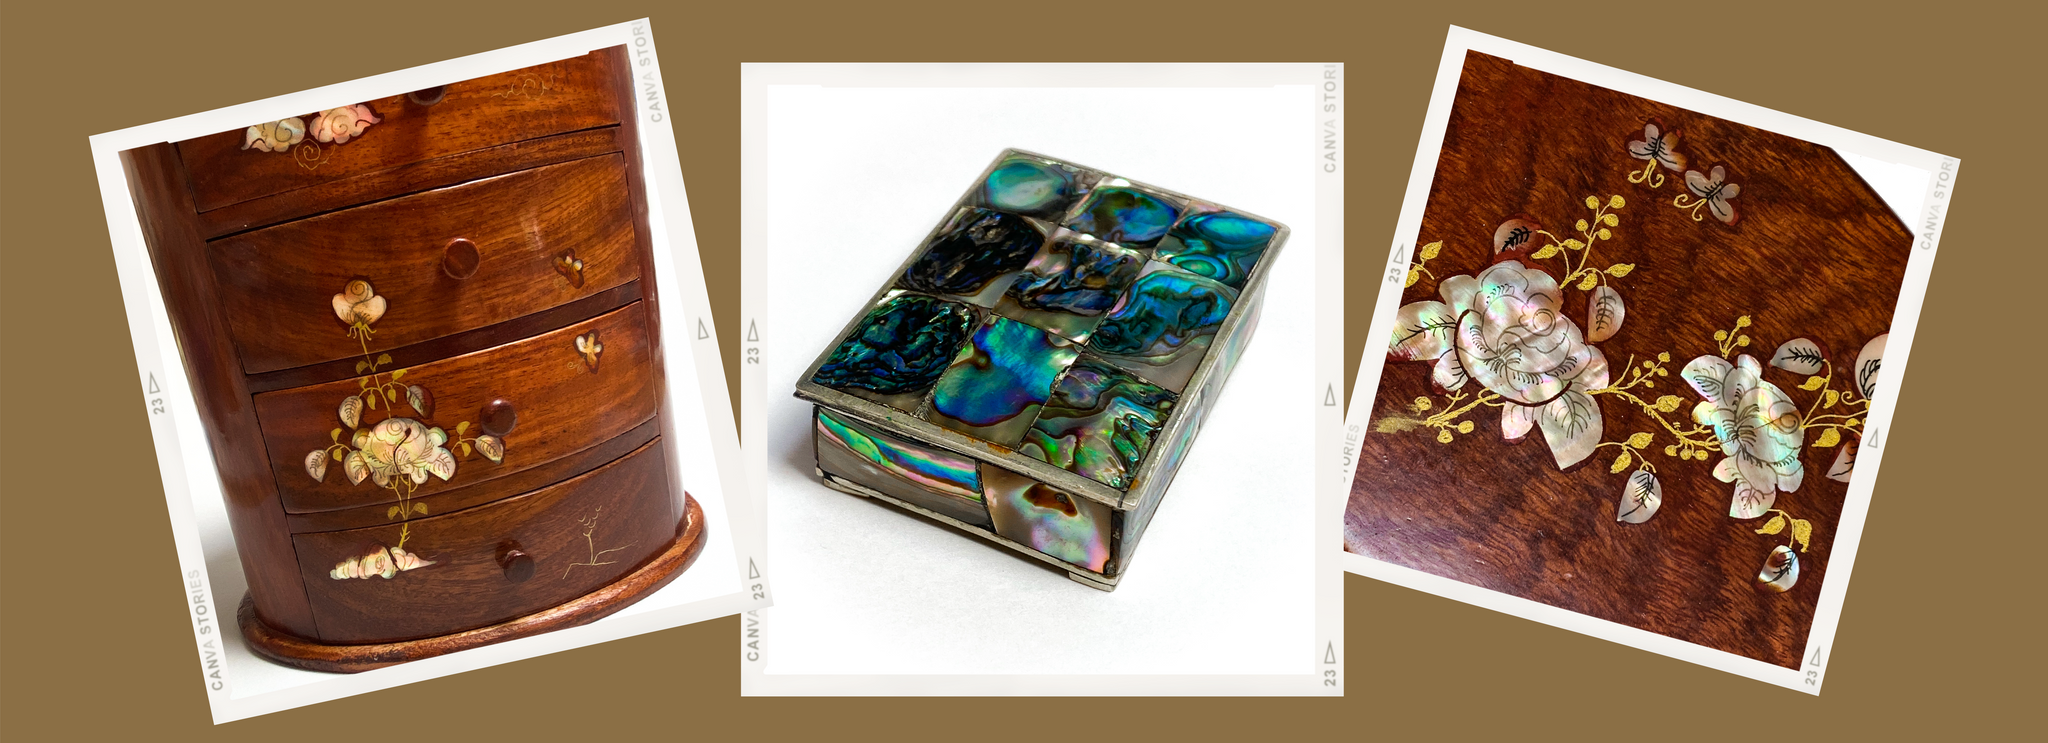 Mother of pearl inlaid jewelry boxes